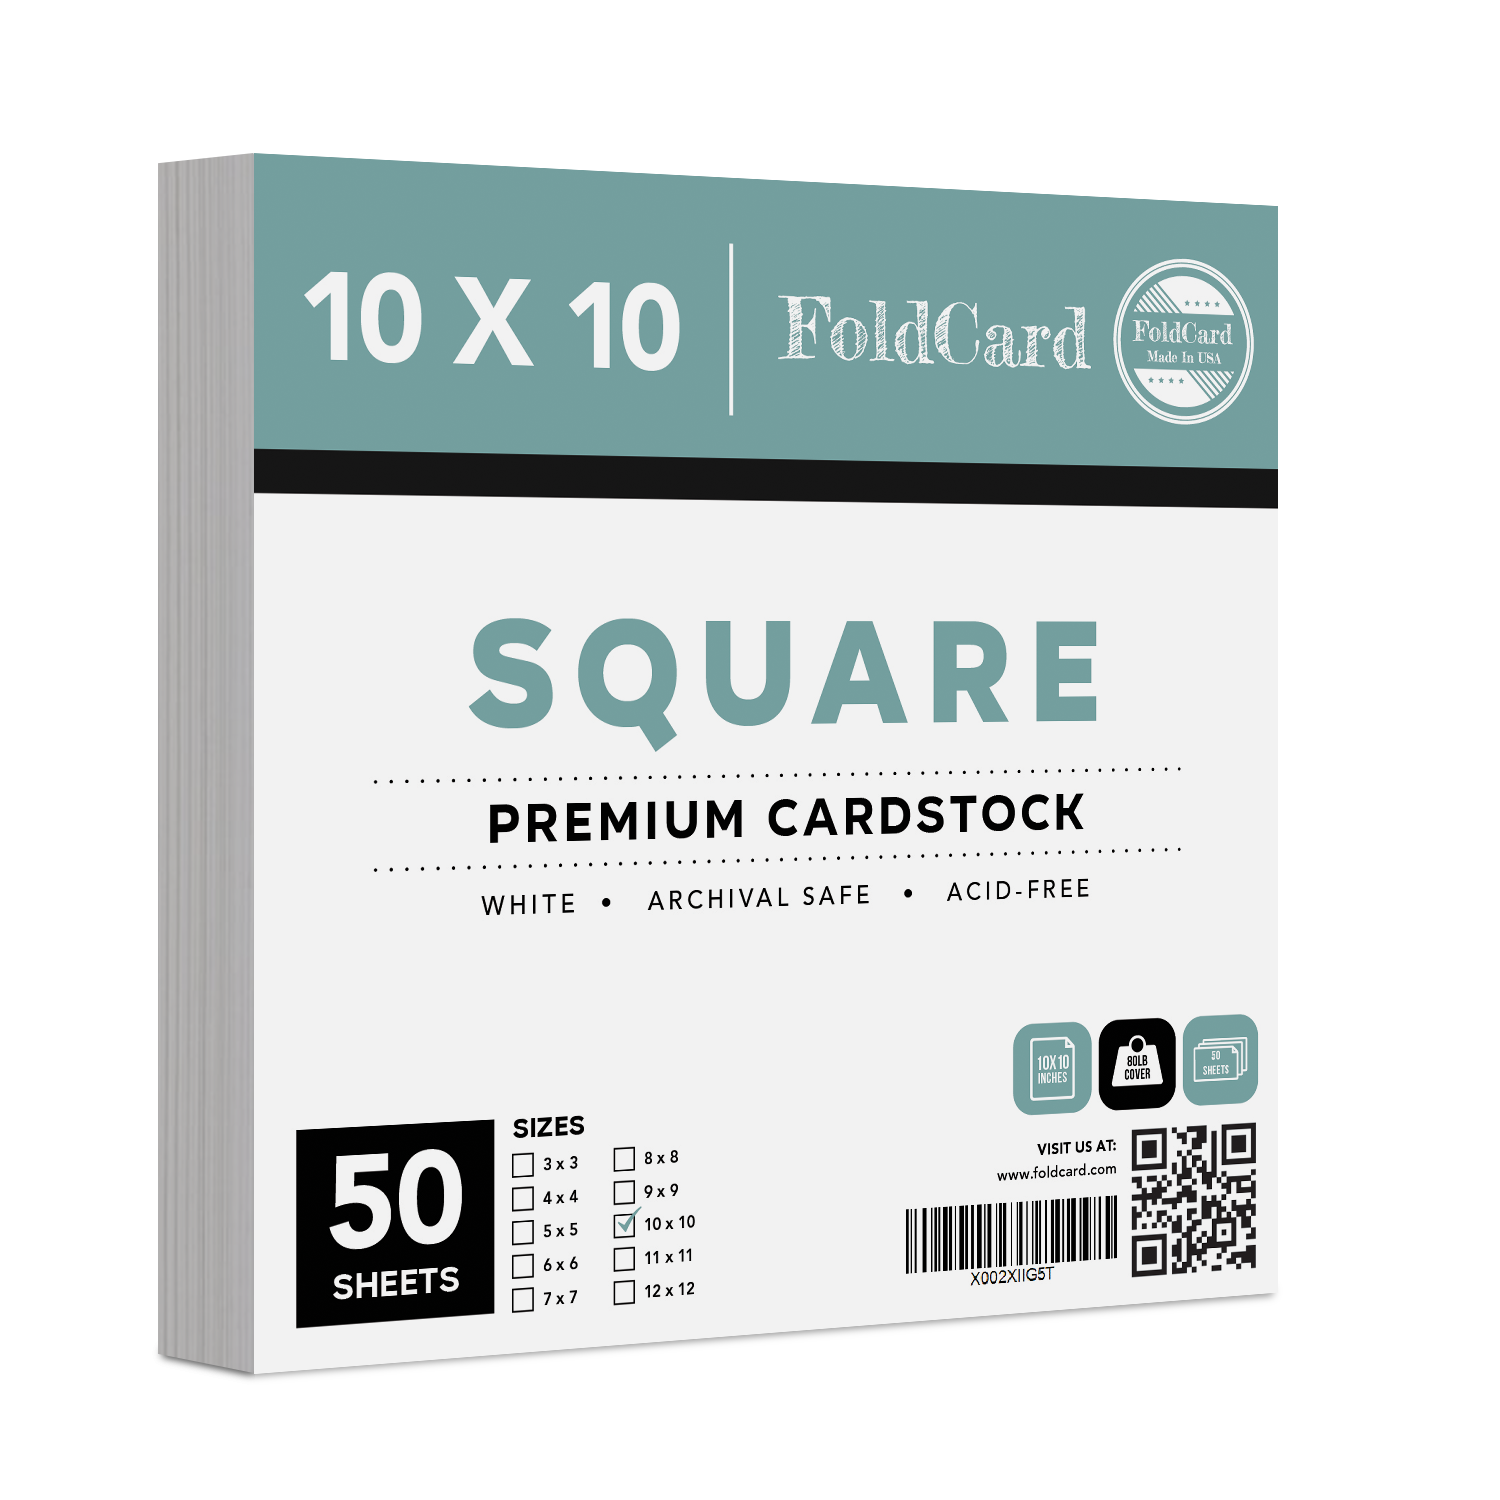 White Square Cardstock 80 LB Cover 50 Sheets Per Pack.